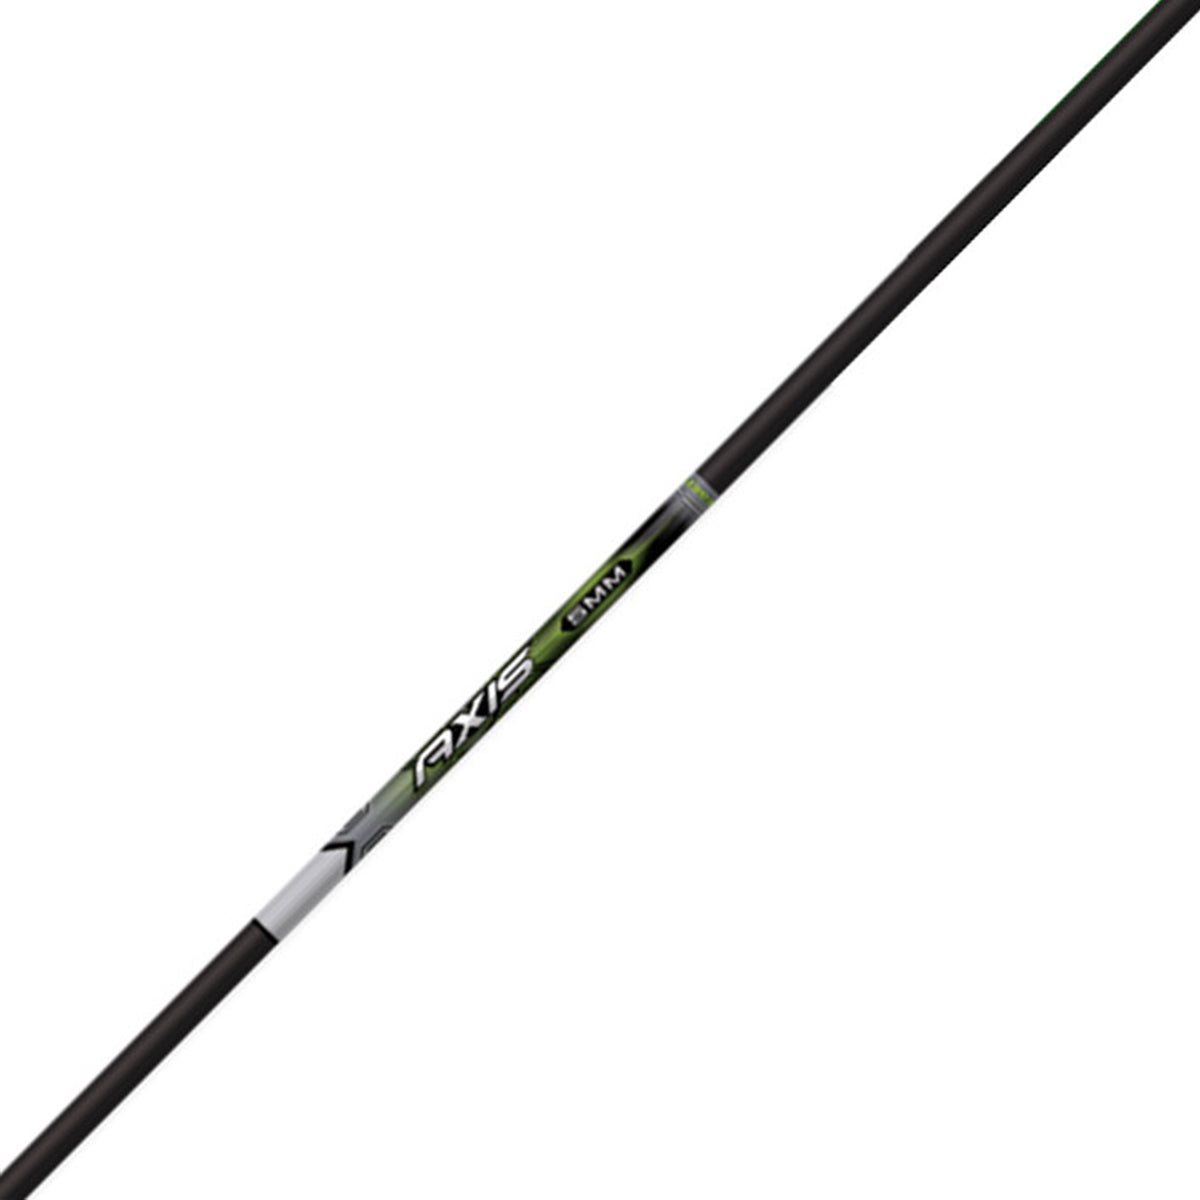 Easton 5mm Axis Arrow Shafts - 12 Count by Easton | Archery - goHUNT Shop